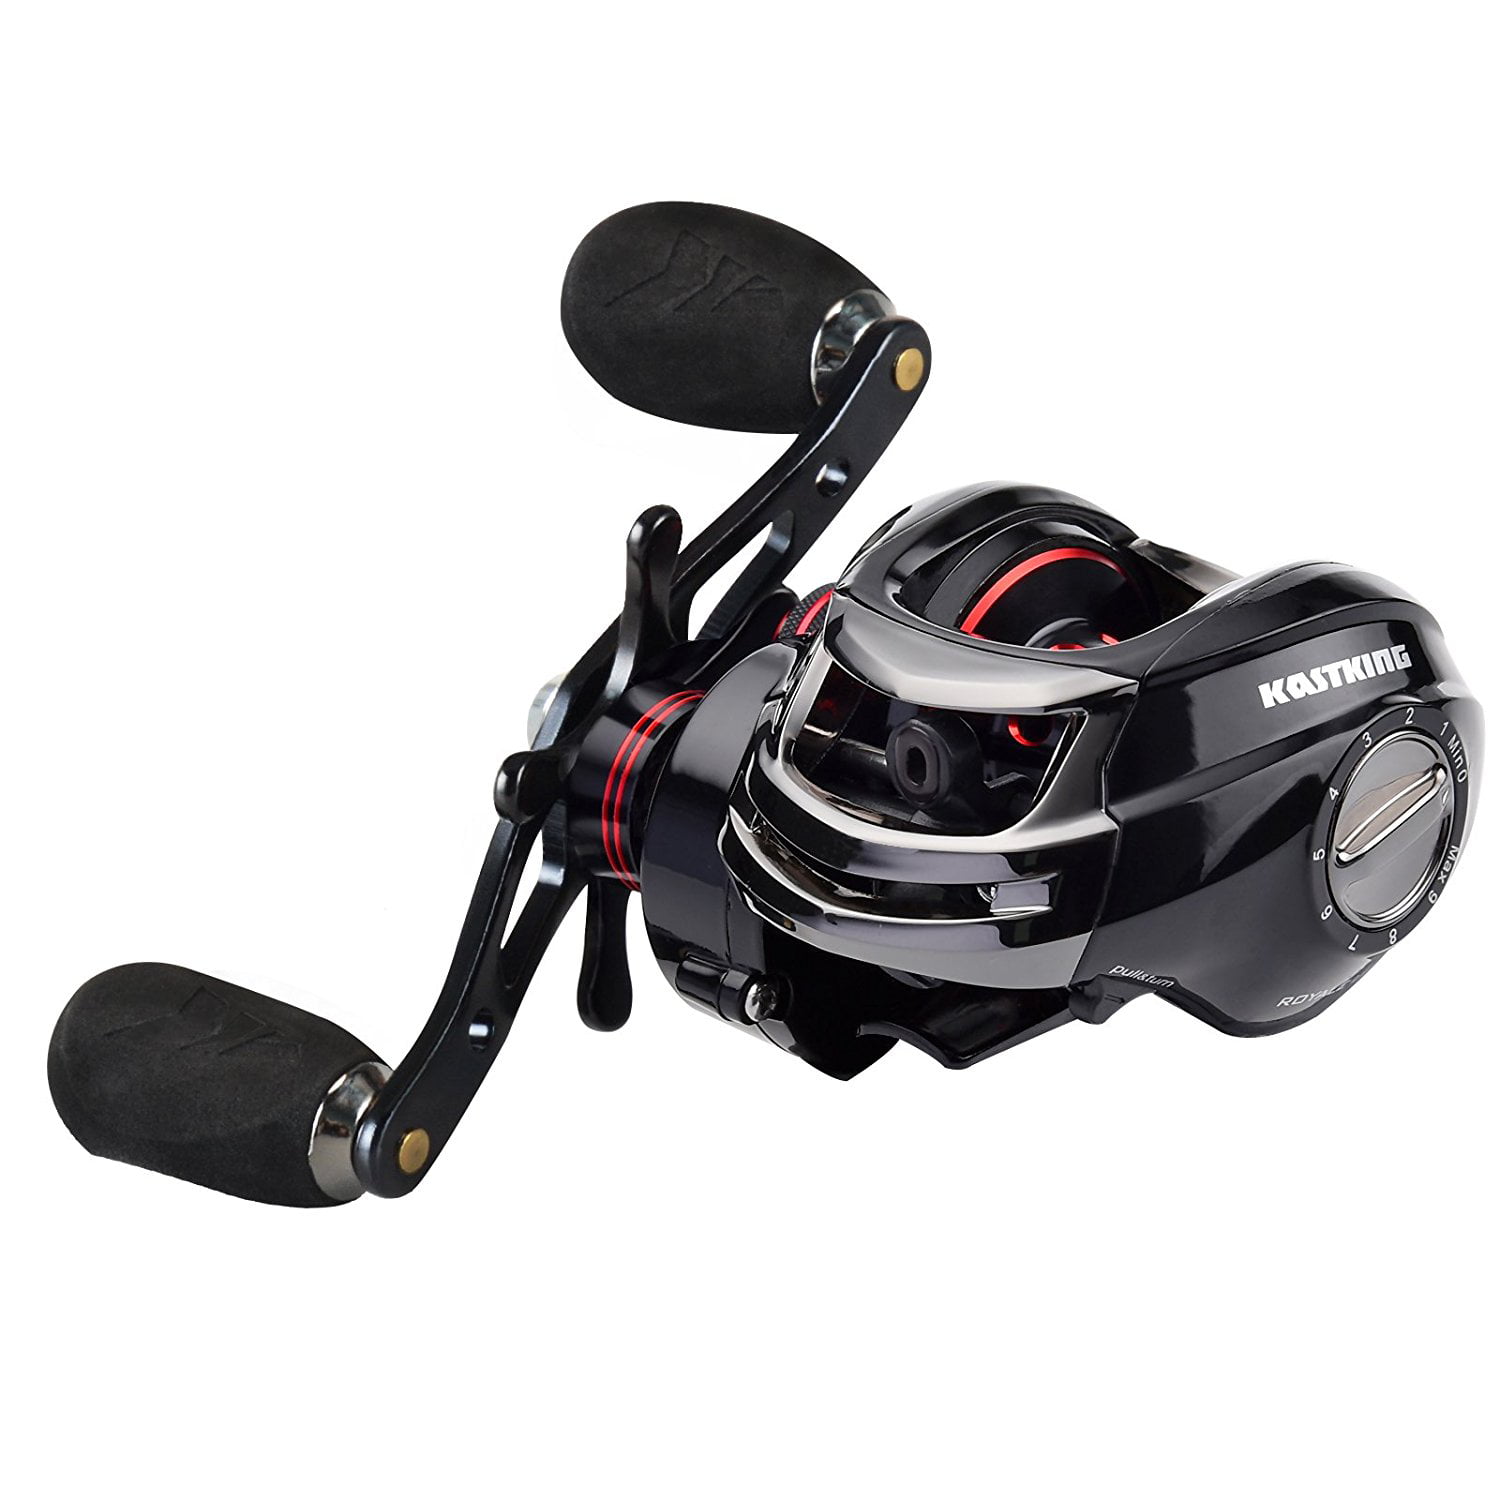 KastKing Royale Fishing Gear Equipment, Casting Conventional